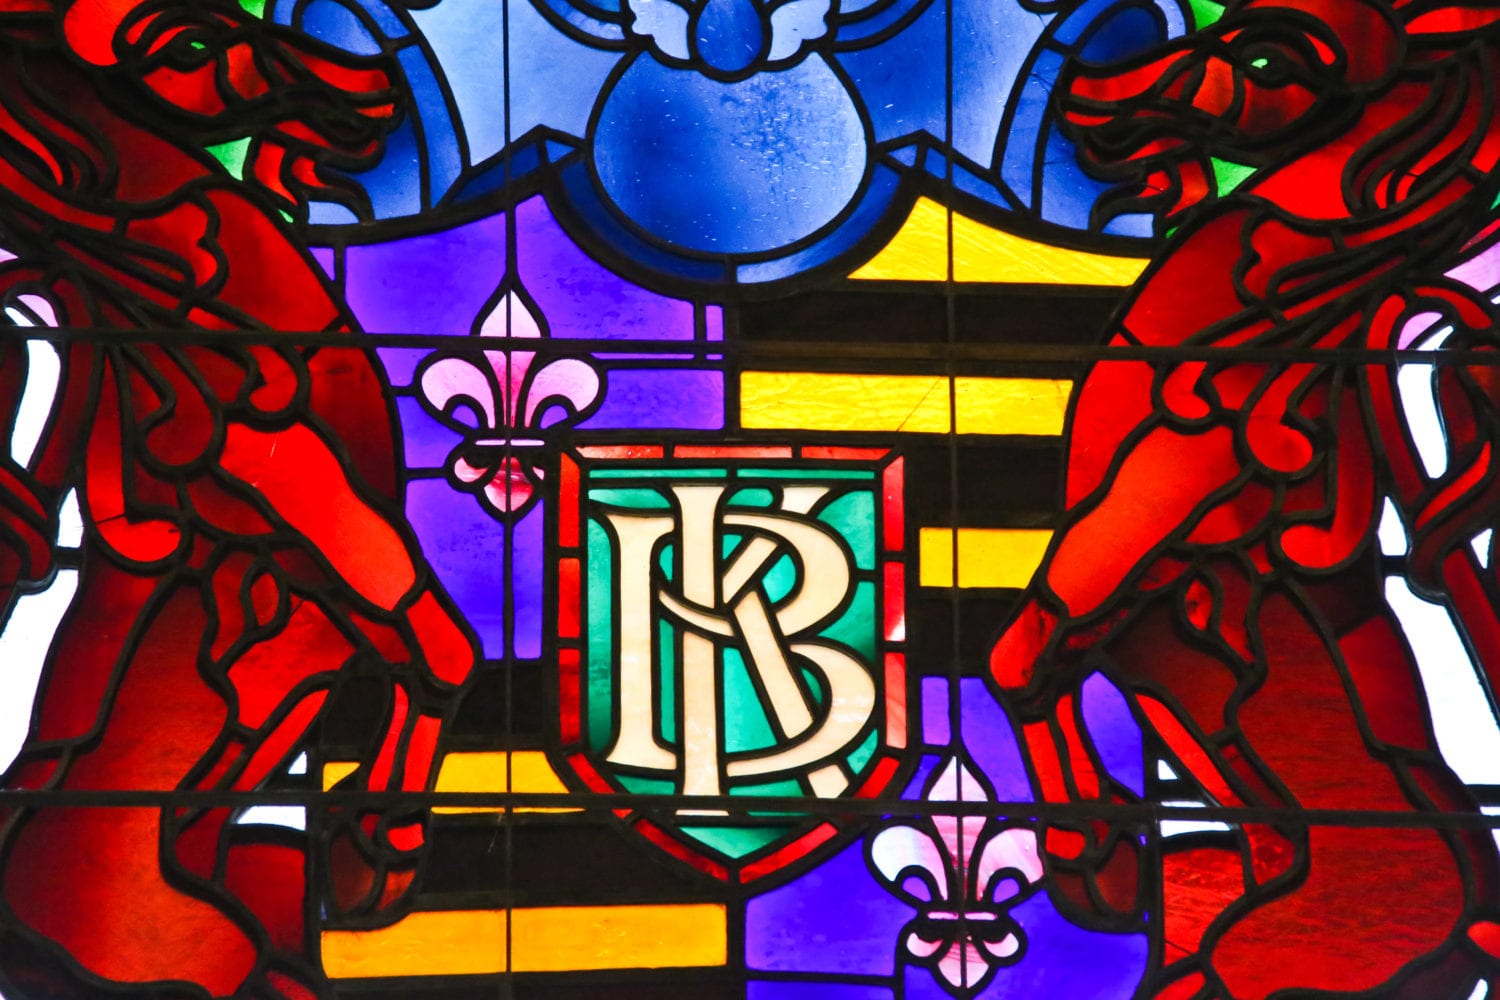 detail of the richly colored balaban & katz's "coat of arms" with rearing lions and film reel